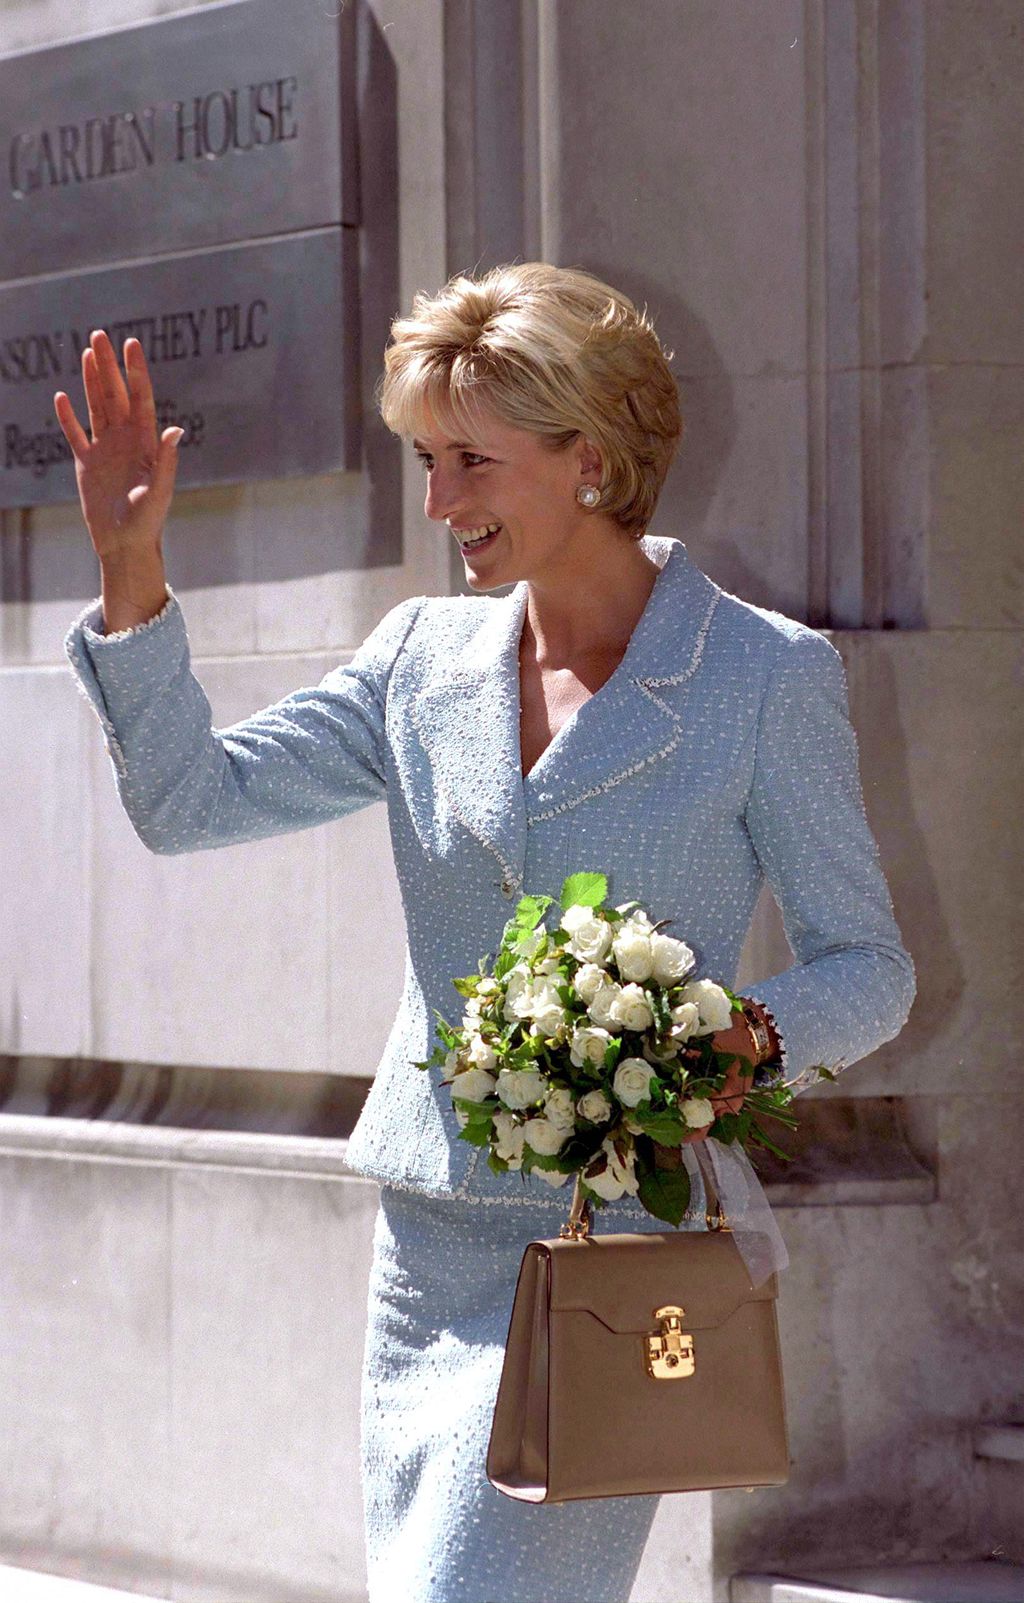 LONDON, UNITED KINGDOM - APRIL 21:  Diana, Princess Of Wales, Leaving The British Lung Foundation In Hatton Garden After Being  Presented With A Bouquet Of The First Rose Named After Her. Diana's Suit Is Designed By Fashion Designer Chanel And She Is Carrying A Handbag Designed By Fashion Designer Lana Marks.  (Photo by Tim Graham Photo Library via Getty Images)